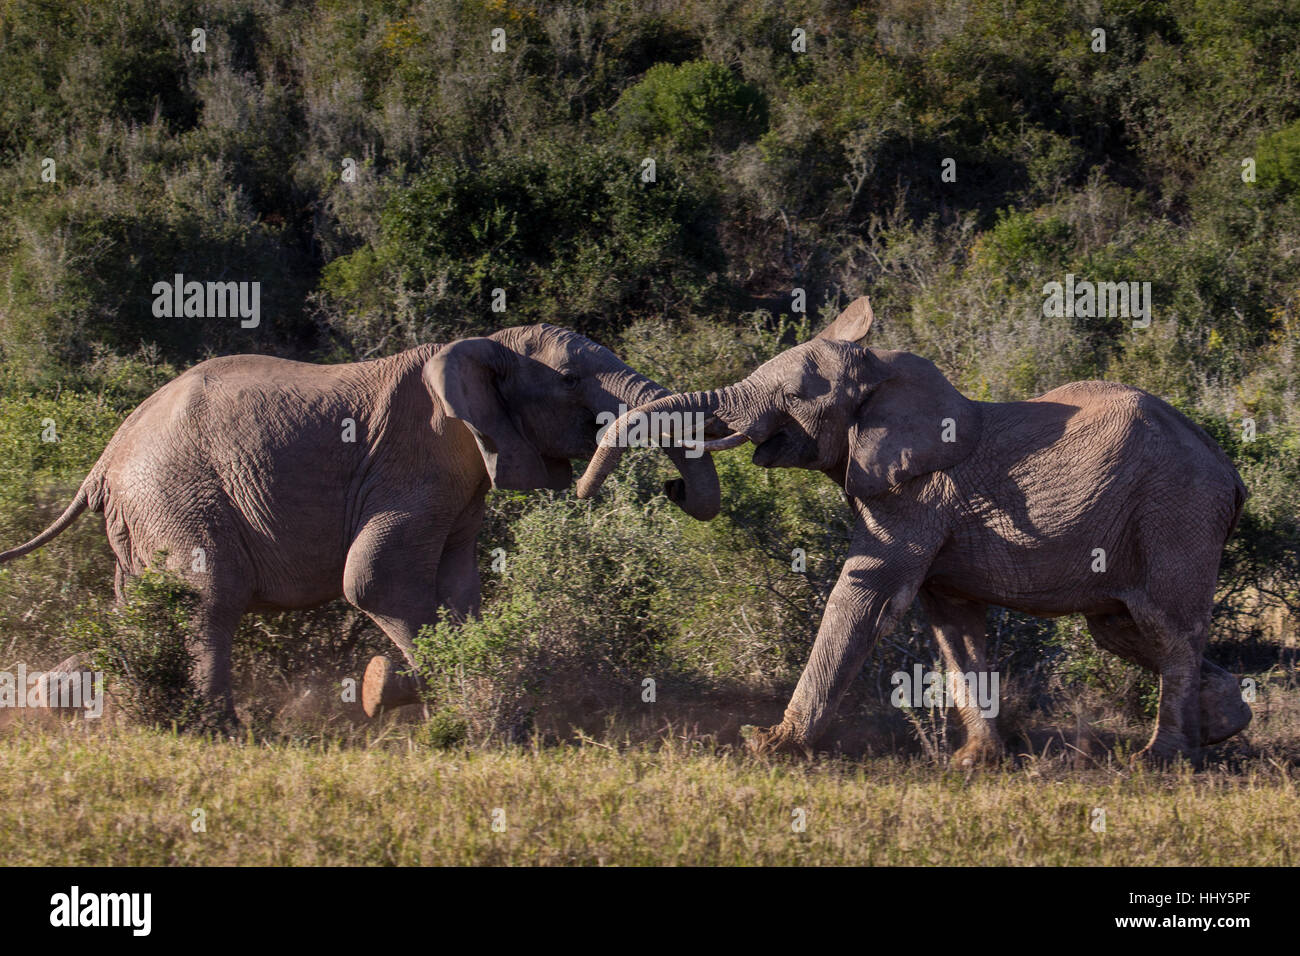 Two young elephant bulls playfully sparring in African bush, South Africa Stock Photo